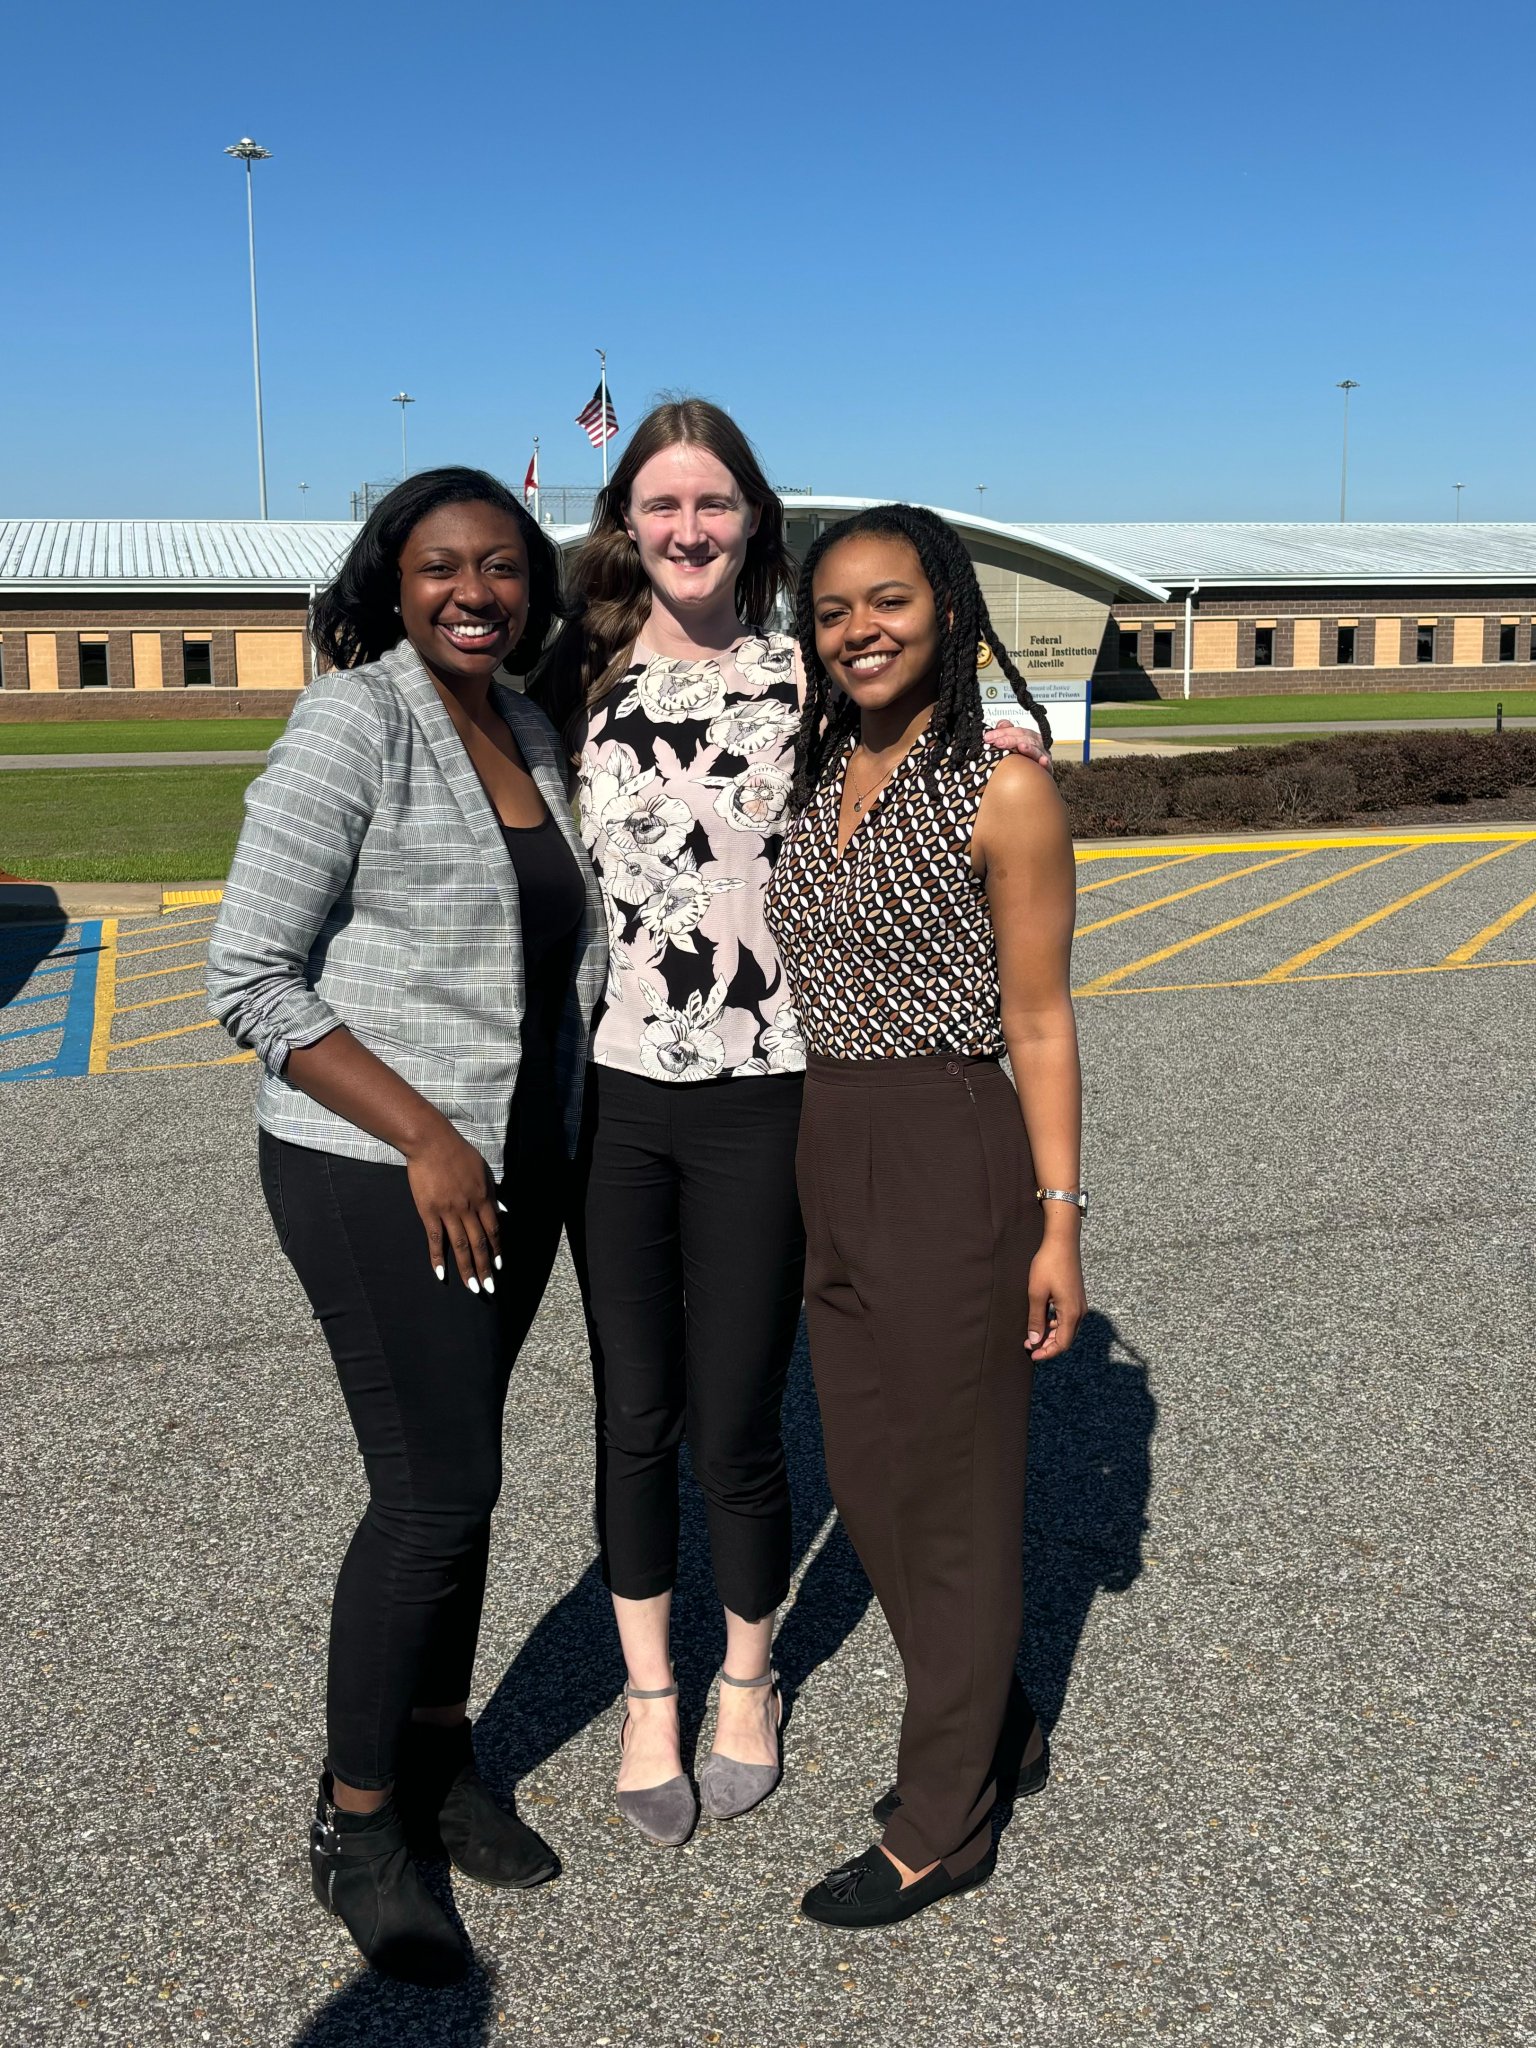 Three law students in a prison parking lot with a blue sky in the background above the prison. Aleah Brown is on the left, she is a Black woman wearing black slacks and a black and white blazer. Virginia Willis, in the middle, is a white woman wearing a black and white bouse and black slacks. Simone Hampton, on the right, is a Black woman wearing black slacks, a patterned blouse, and holding her blazer in her left hand. They are all smiling brightly. To protect her privacy, the client is not pictured.